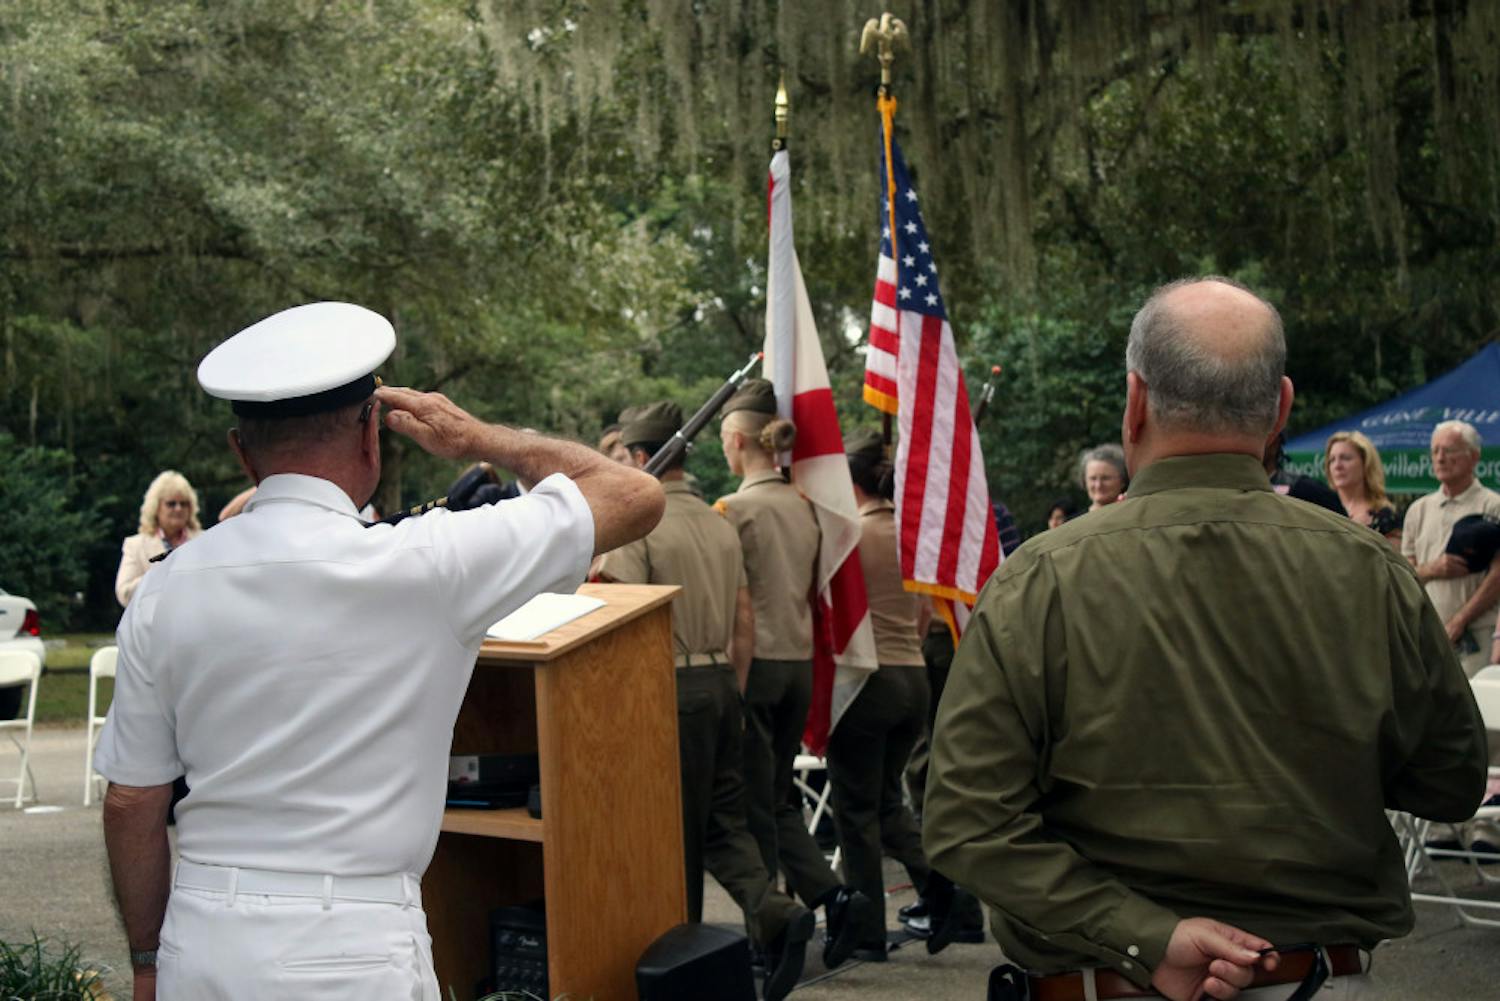 Retired Lt. Commander Gary Cook (L) salutes the flag as the Milton Lewis Young Marines present the colors at a Veterans Day event at Evergreen Cemetery in Gainesville on Monday, Nov. 12, 2018. The event was held to honor the veterans buried in the cemetery and to commemorate the 100th anniversary of the end of World War One.